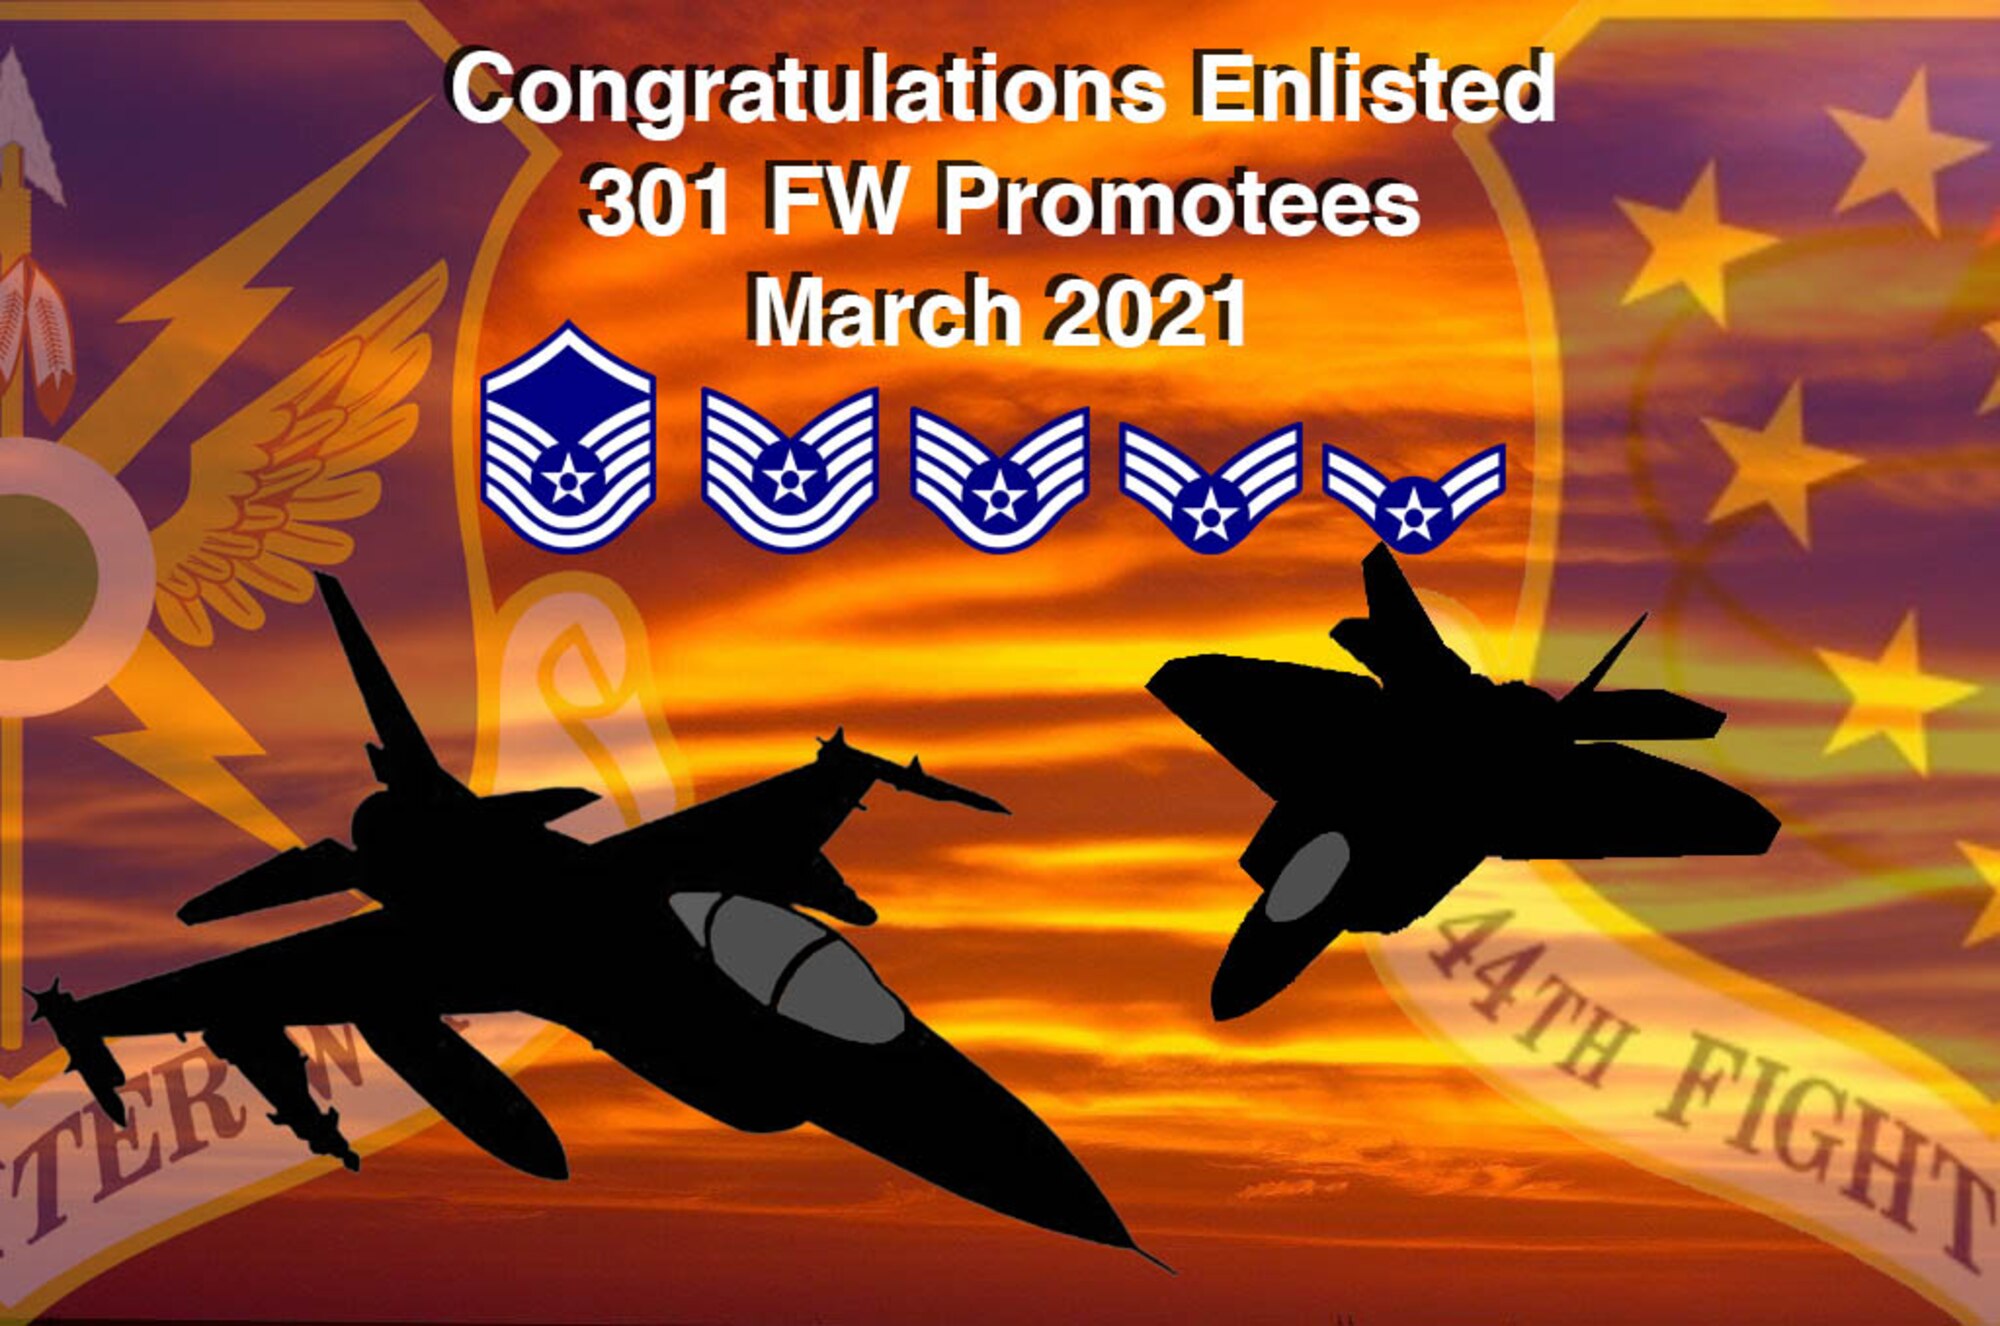 301st Fighter Wing enlisted promotees March 2021